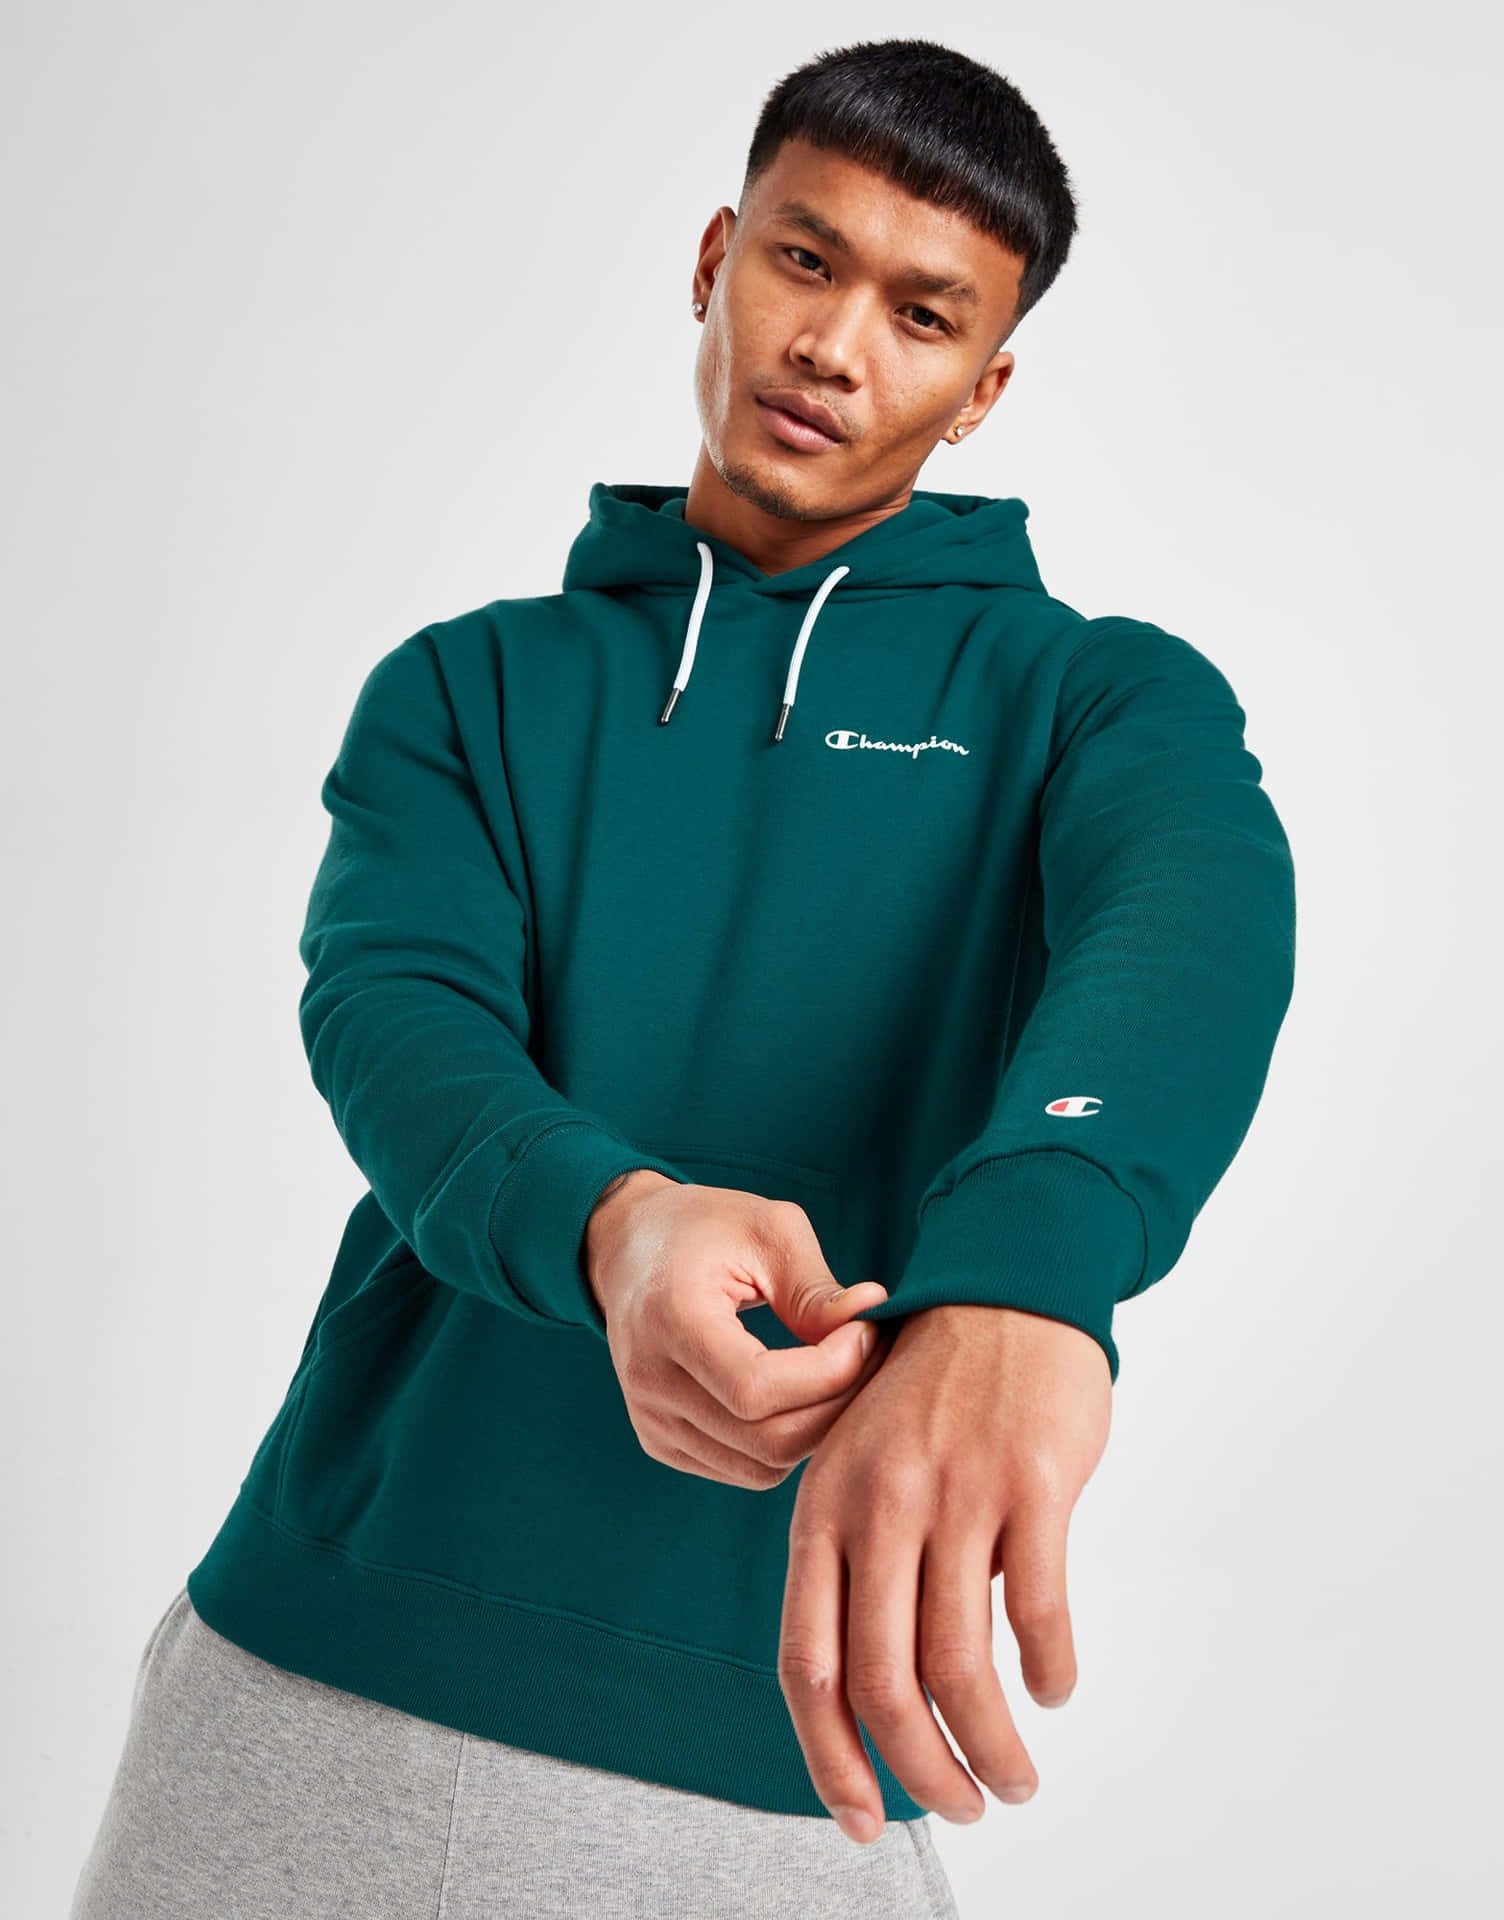 Up Your Game With Champion Gear